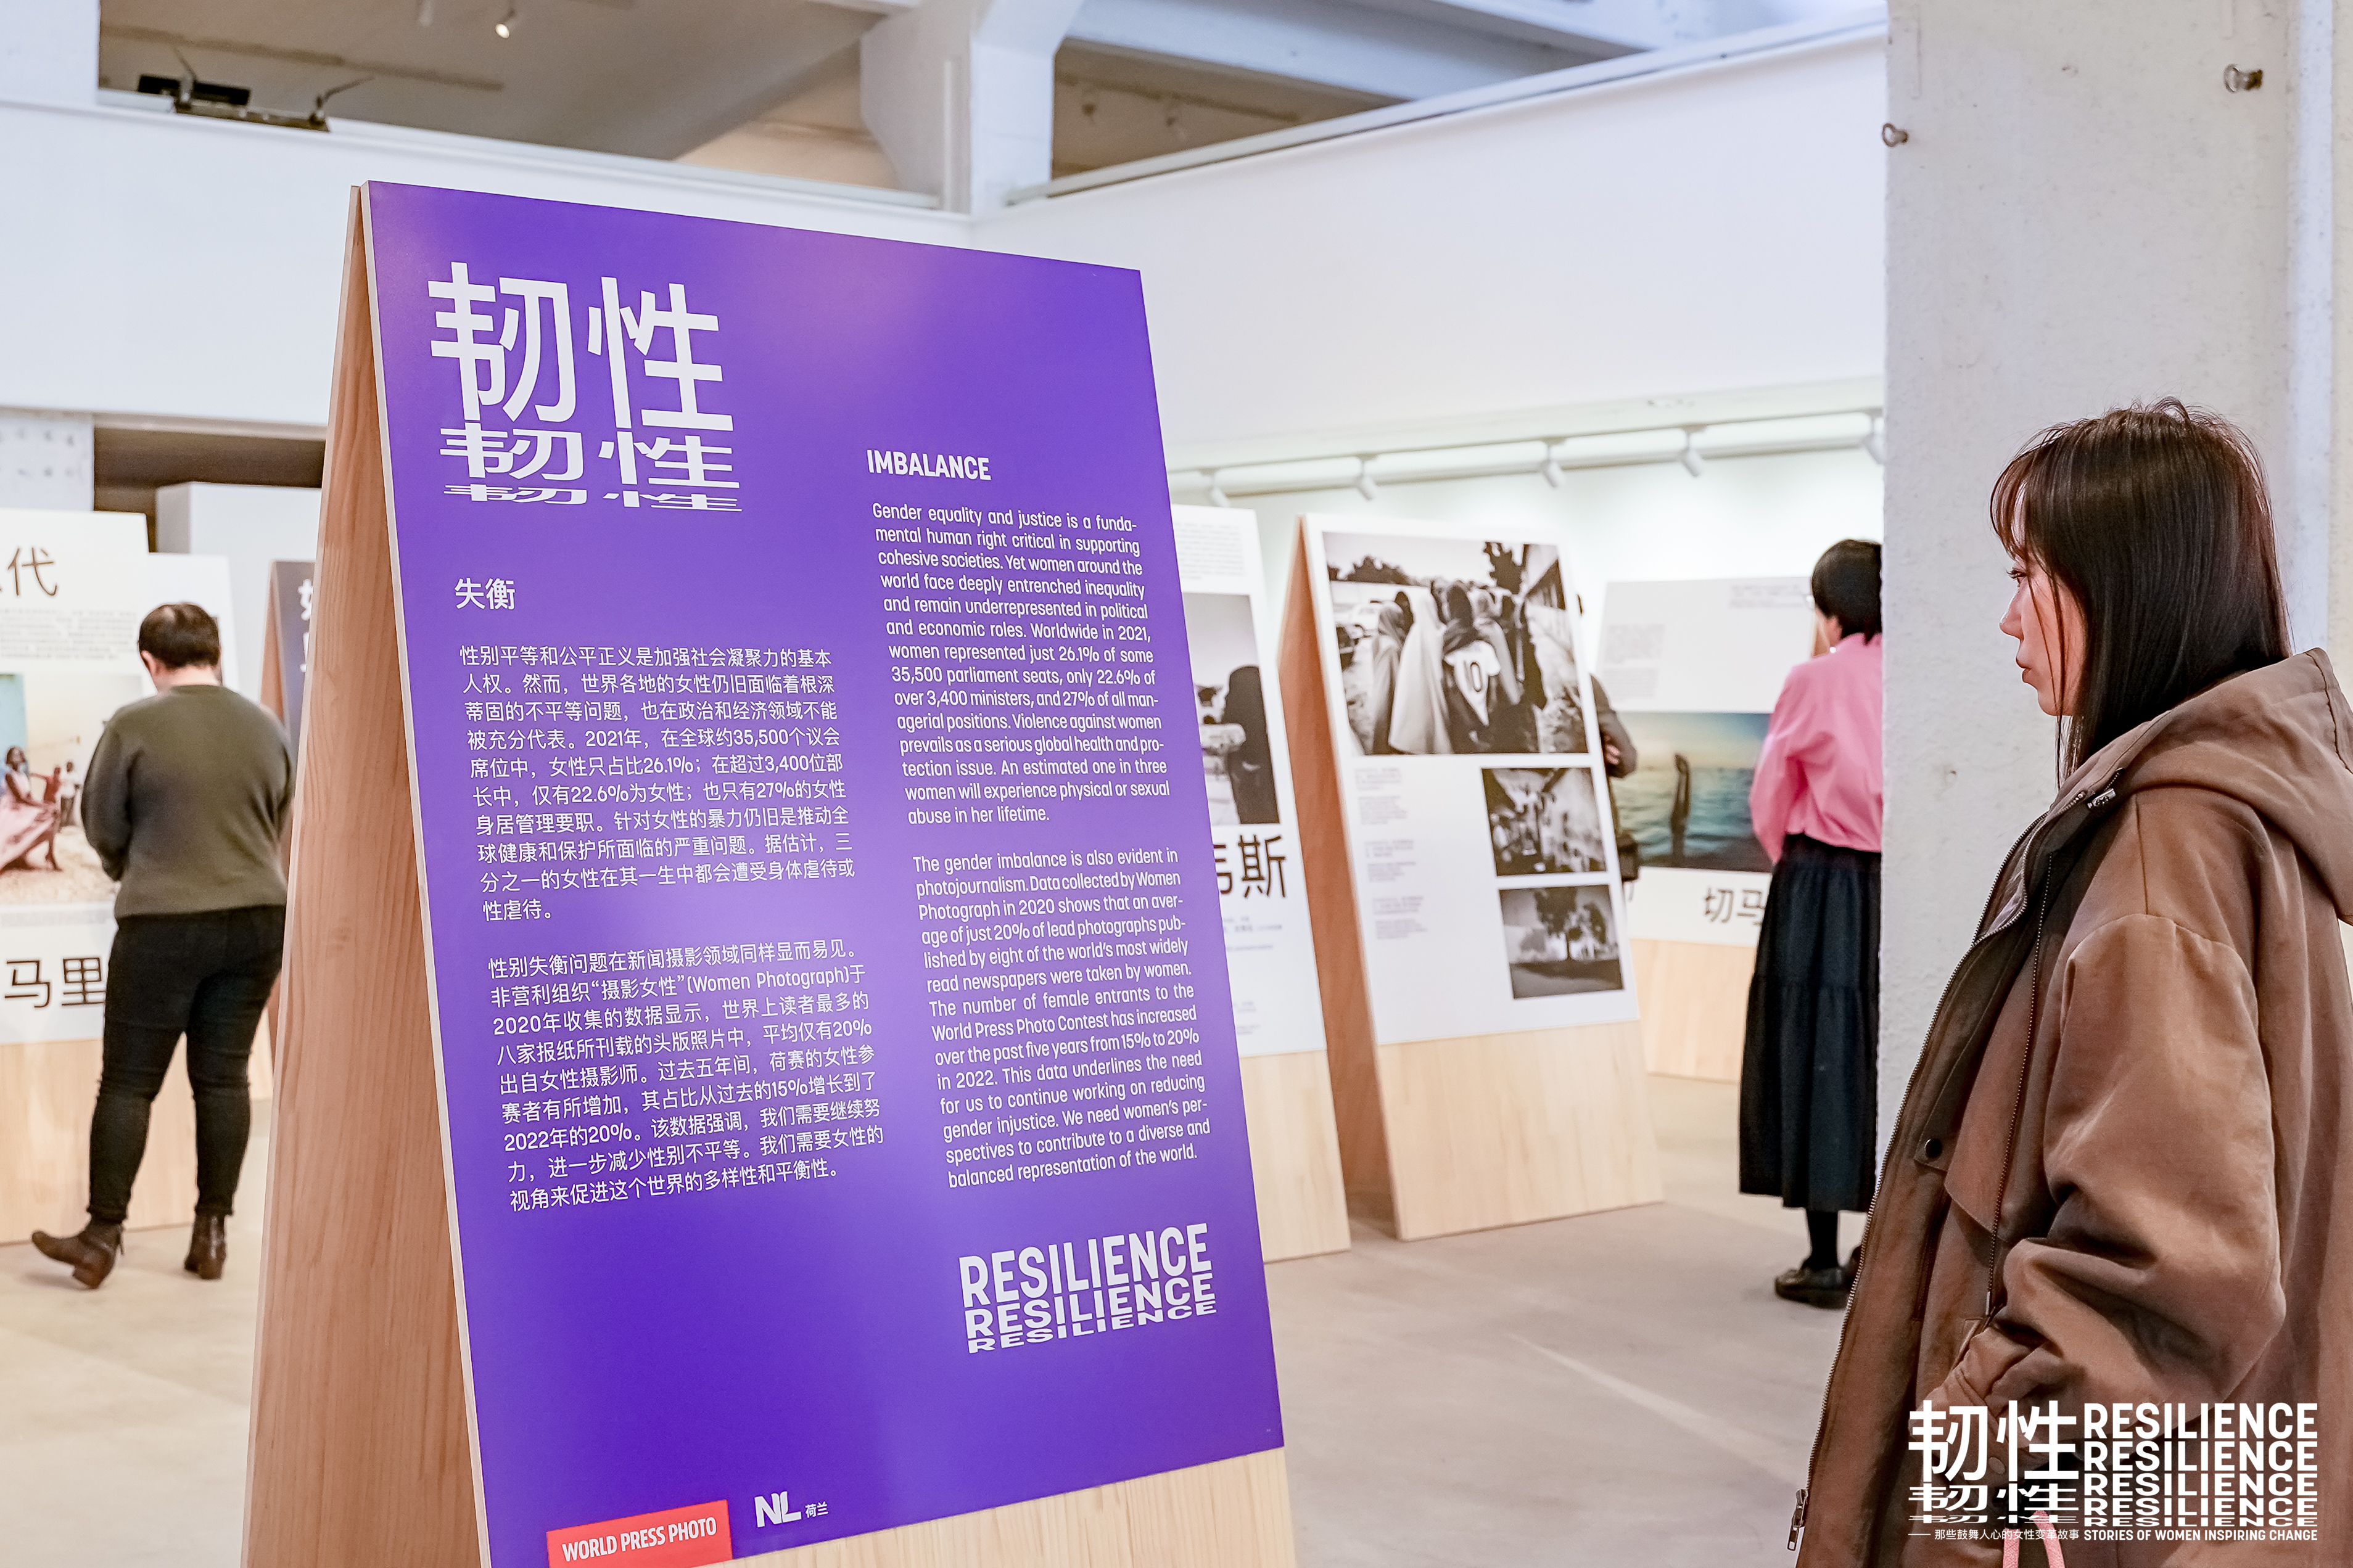 'Resilience- stories of women inspiring change' exhibition. 